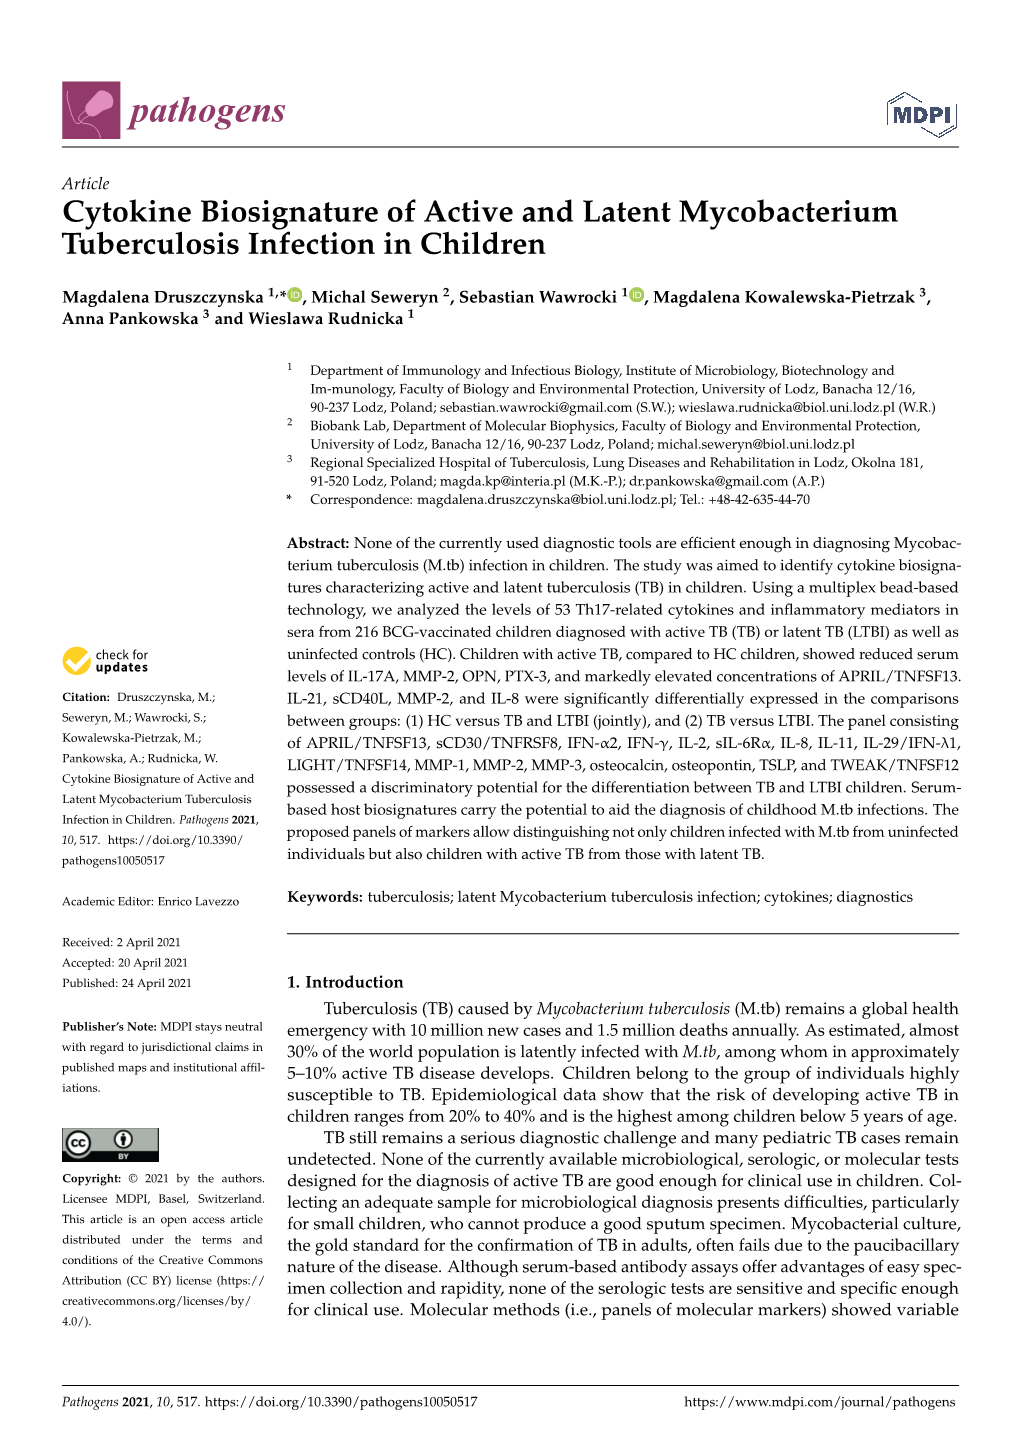 Cytokine Biosignature of Active and Latent Mycobacterium Tuberculosis Infection in Children